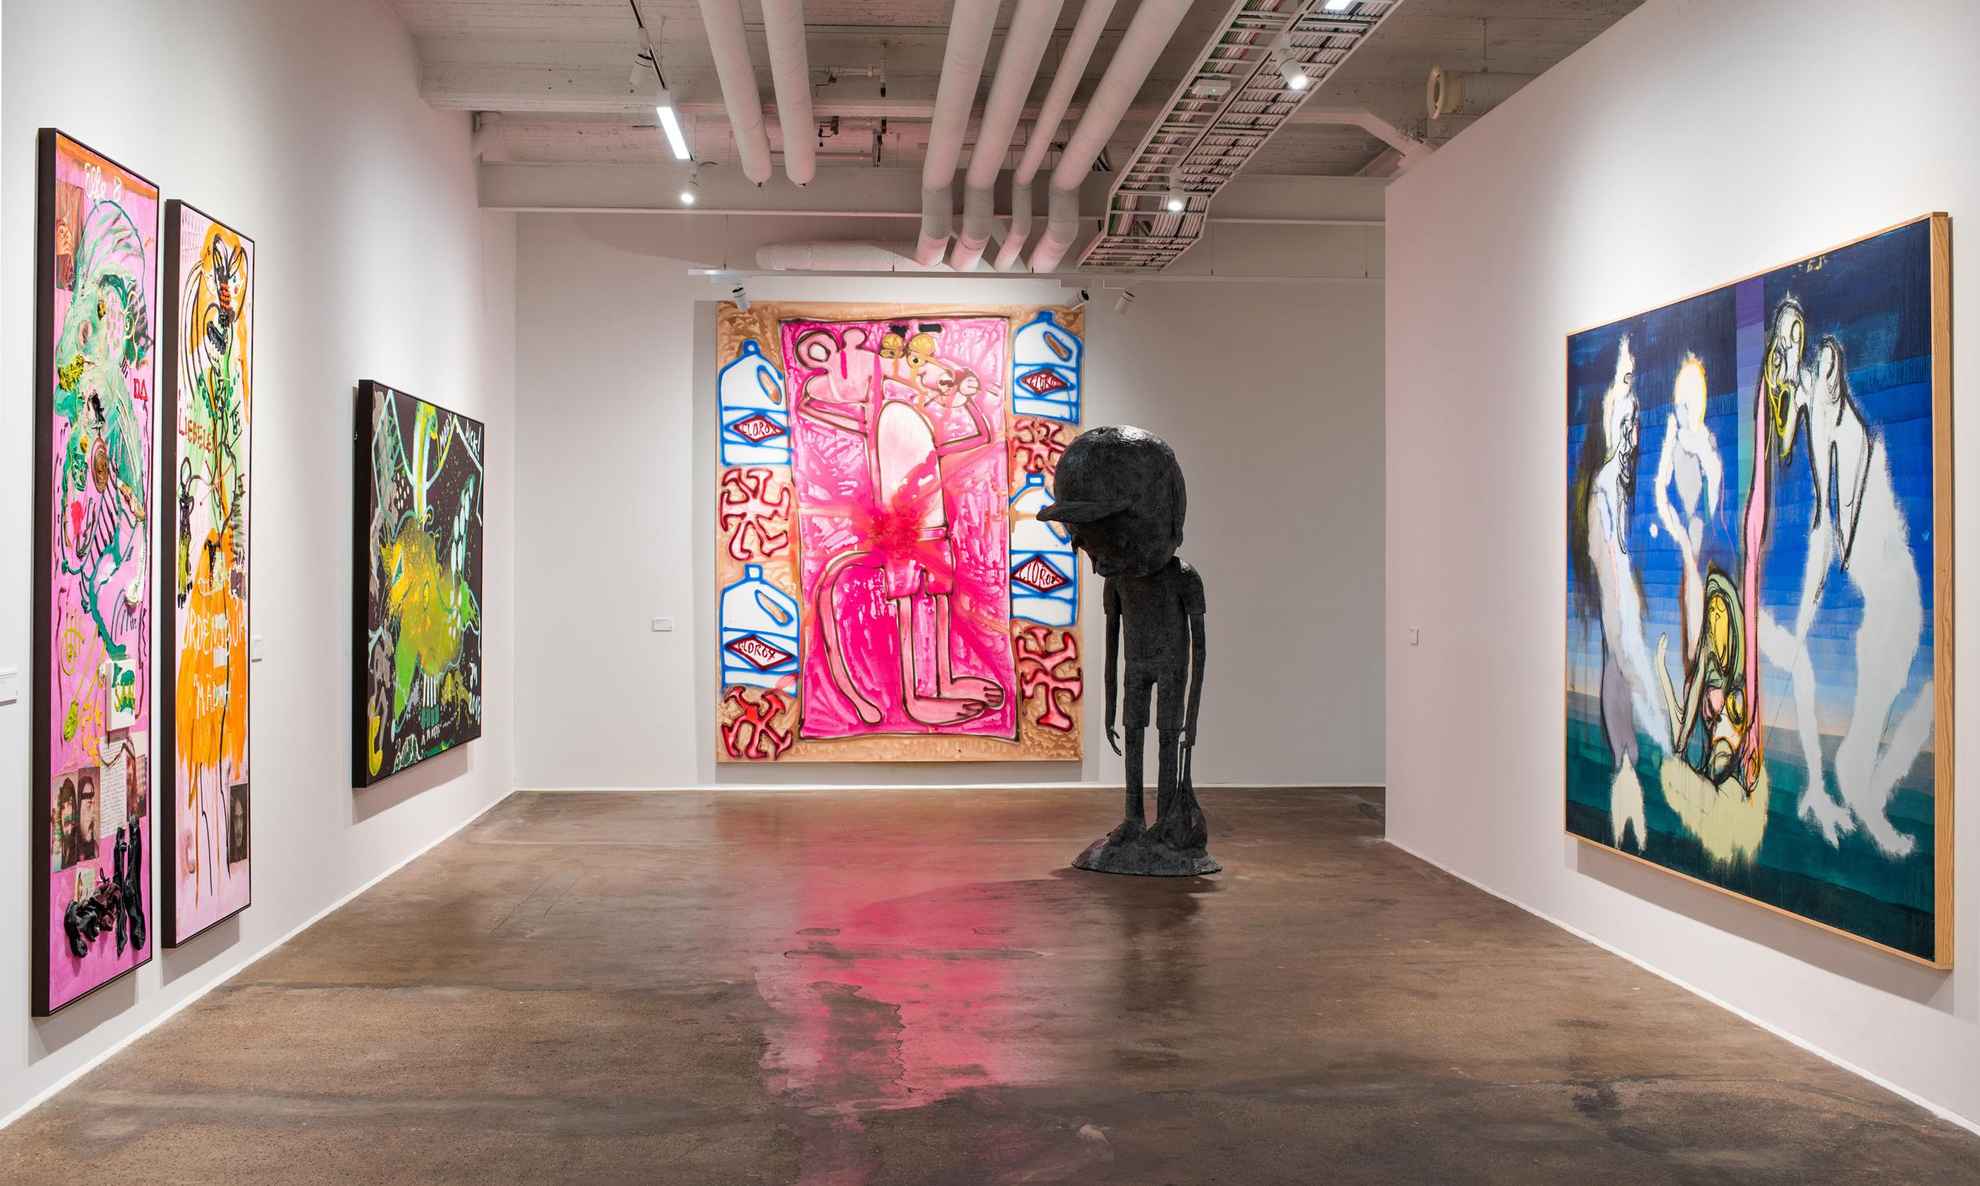 An exhibition with a large statue in a room and paintings on the wall.